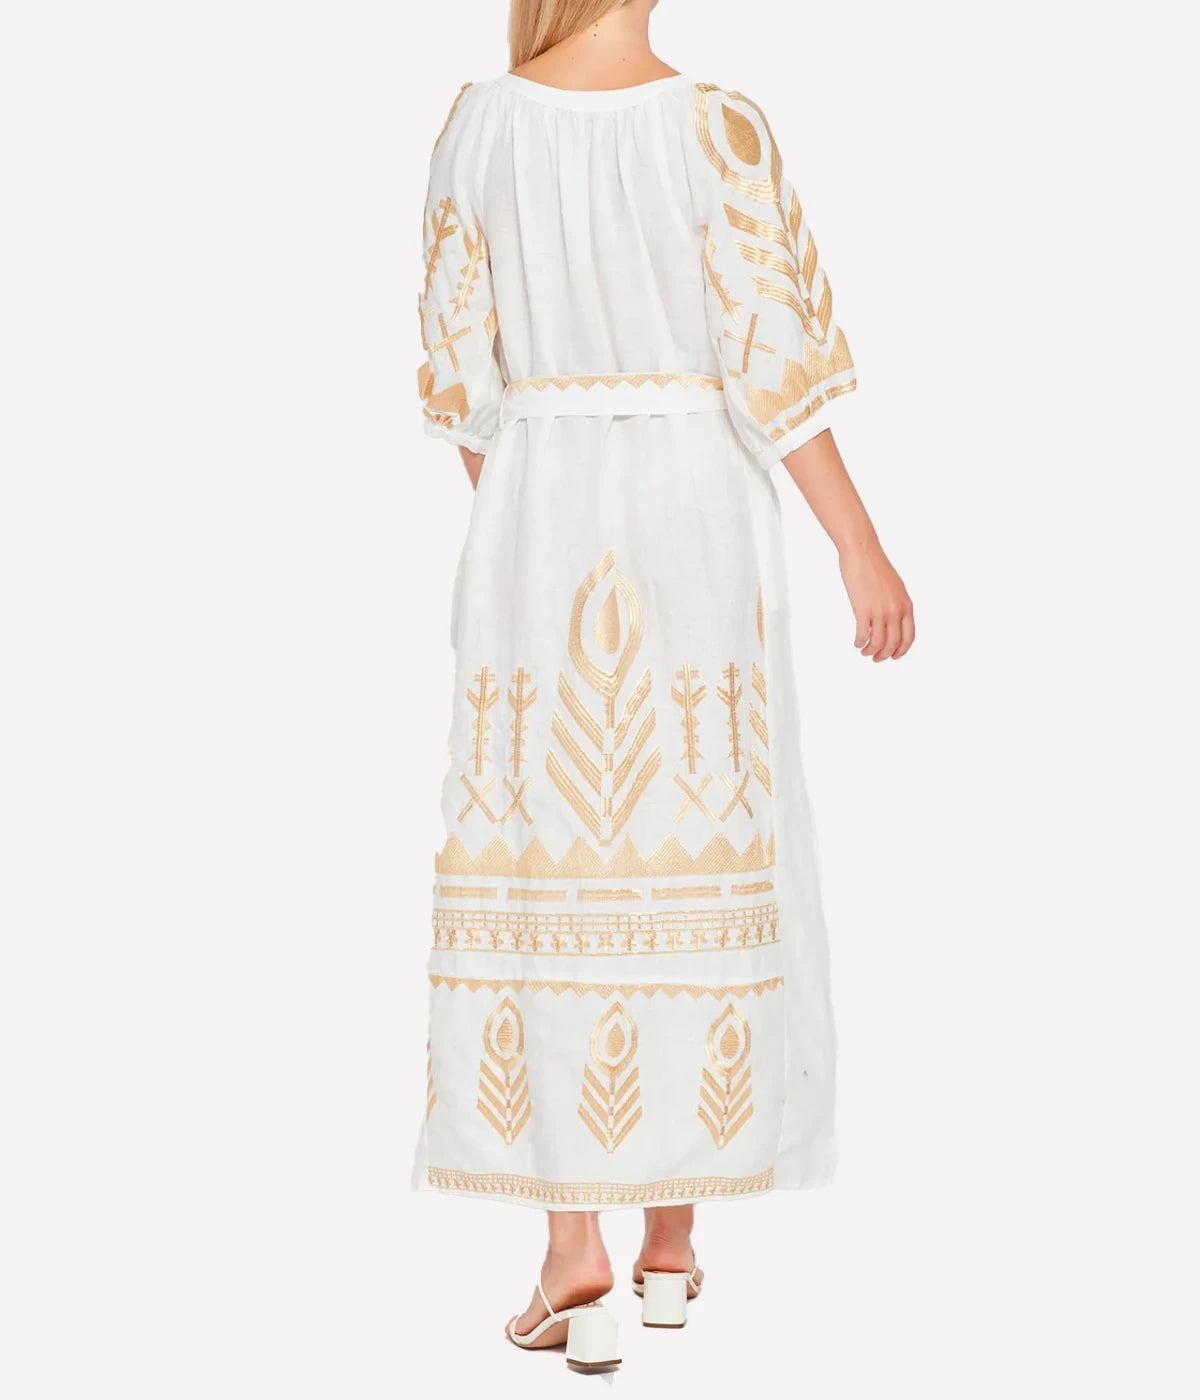 Long Feather Dress in White & Gold